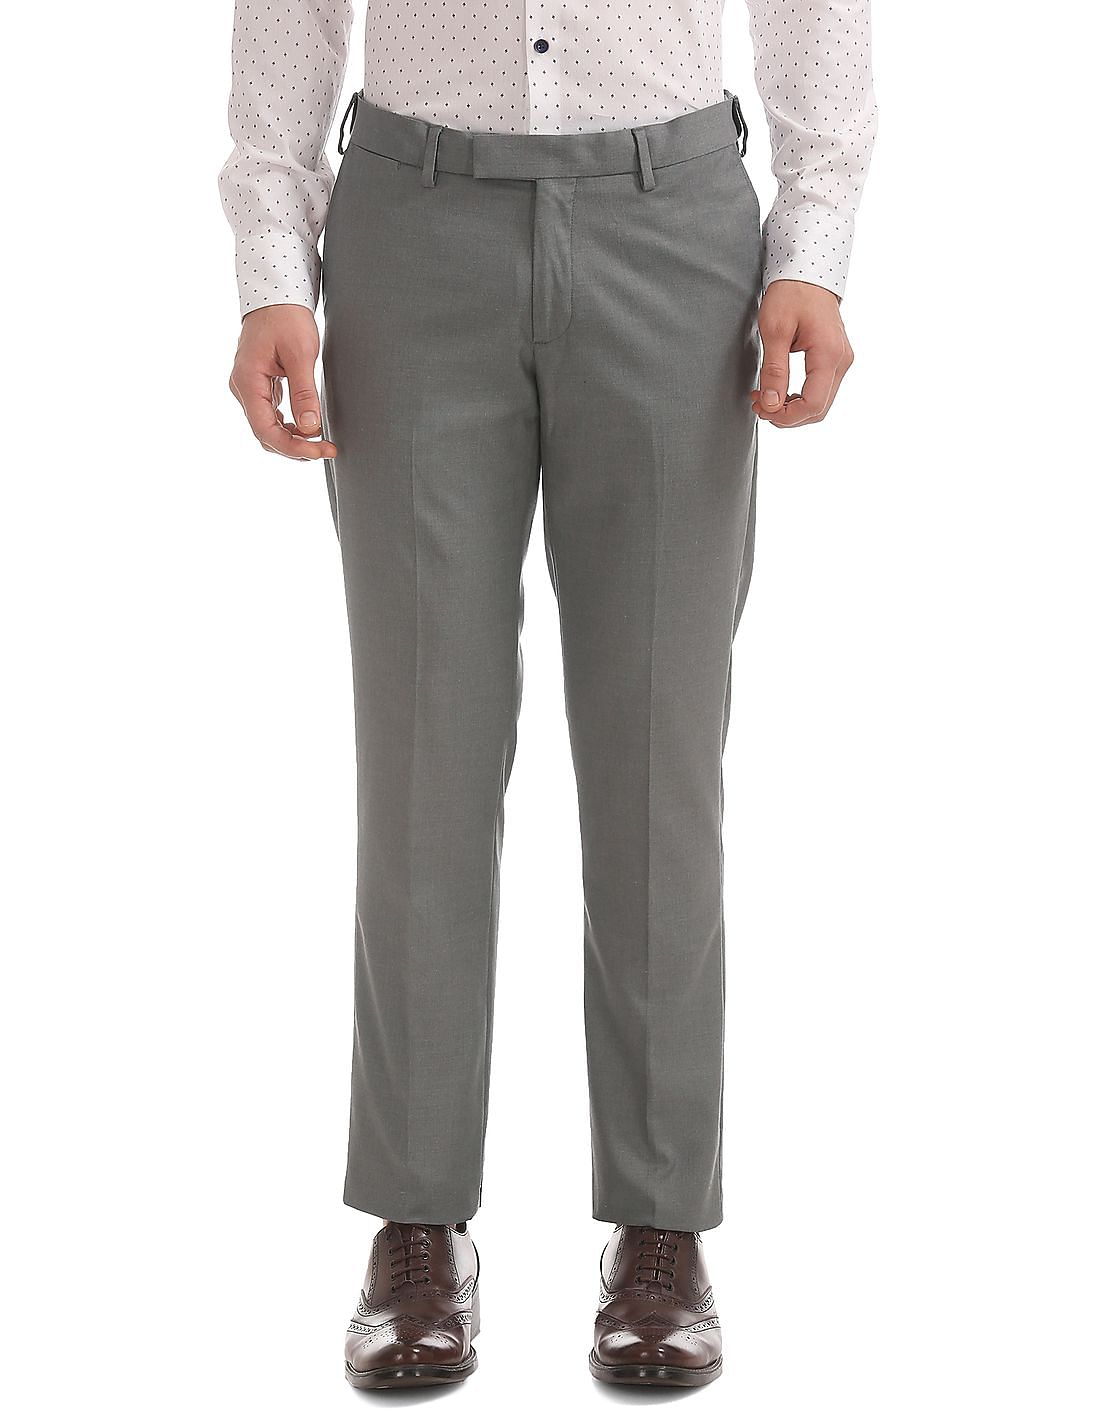 Buy USPA Tailored Men Flat Front Slim Fit Trousers - NNNOW.com